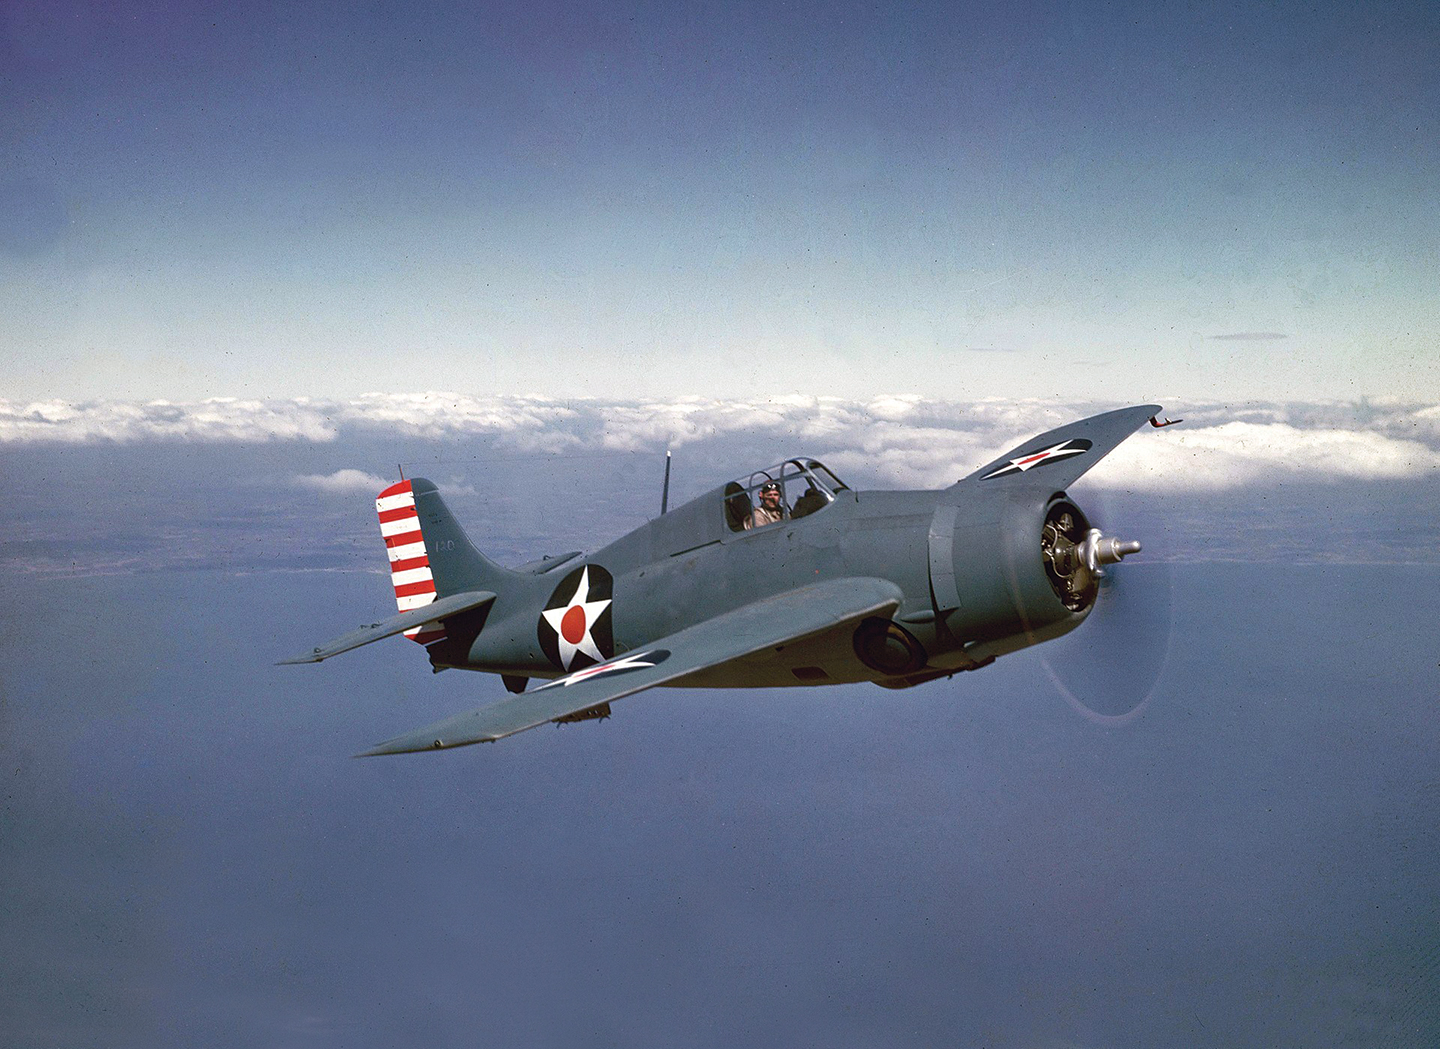 This F4F-3 Wildcat sports insignia on top of both wings, a pattern the U.S. Navy employed briefly in 1942-43. (Naval History and Heritage Command)